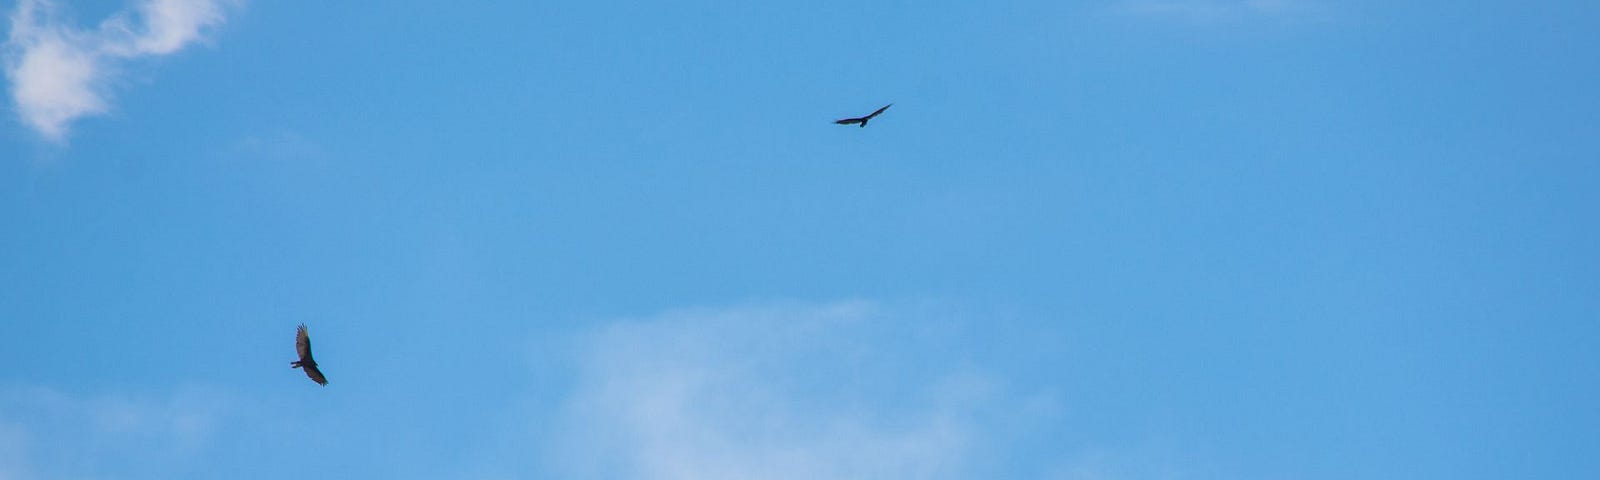 A photo of three birds flying in a blue sky with faint clouds.